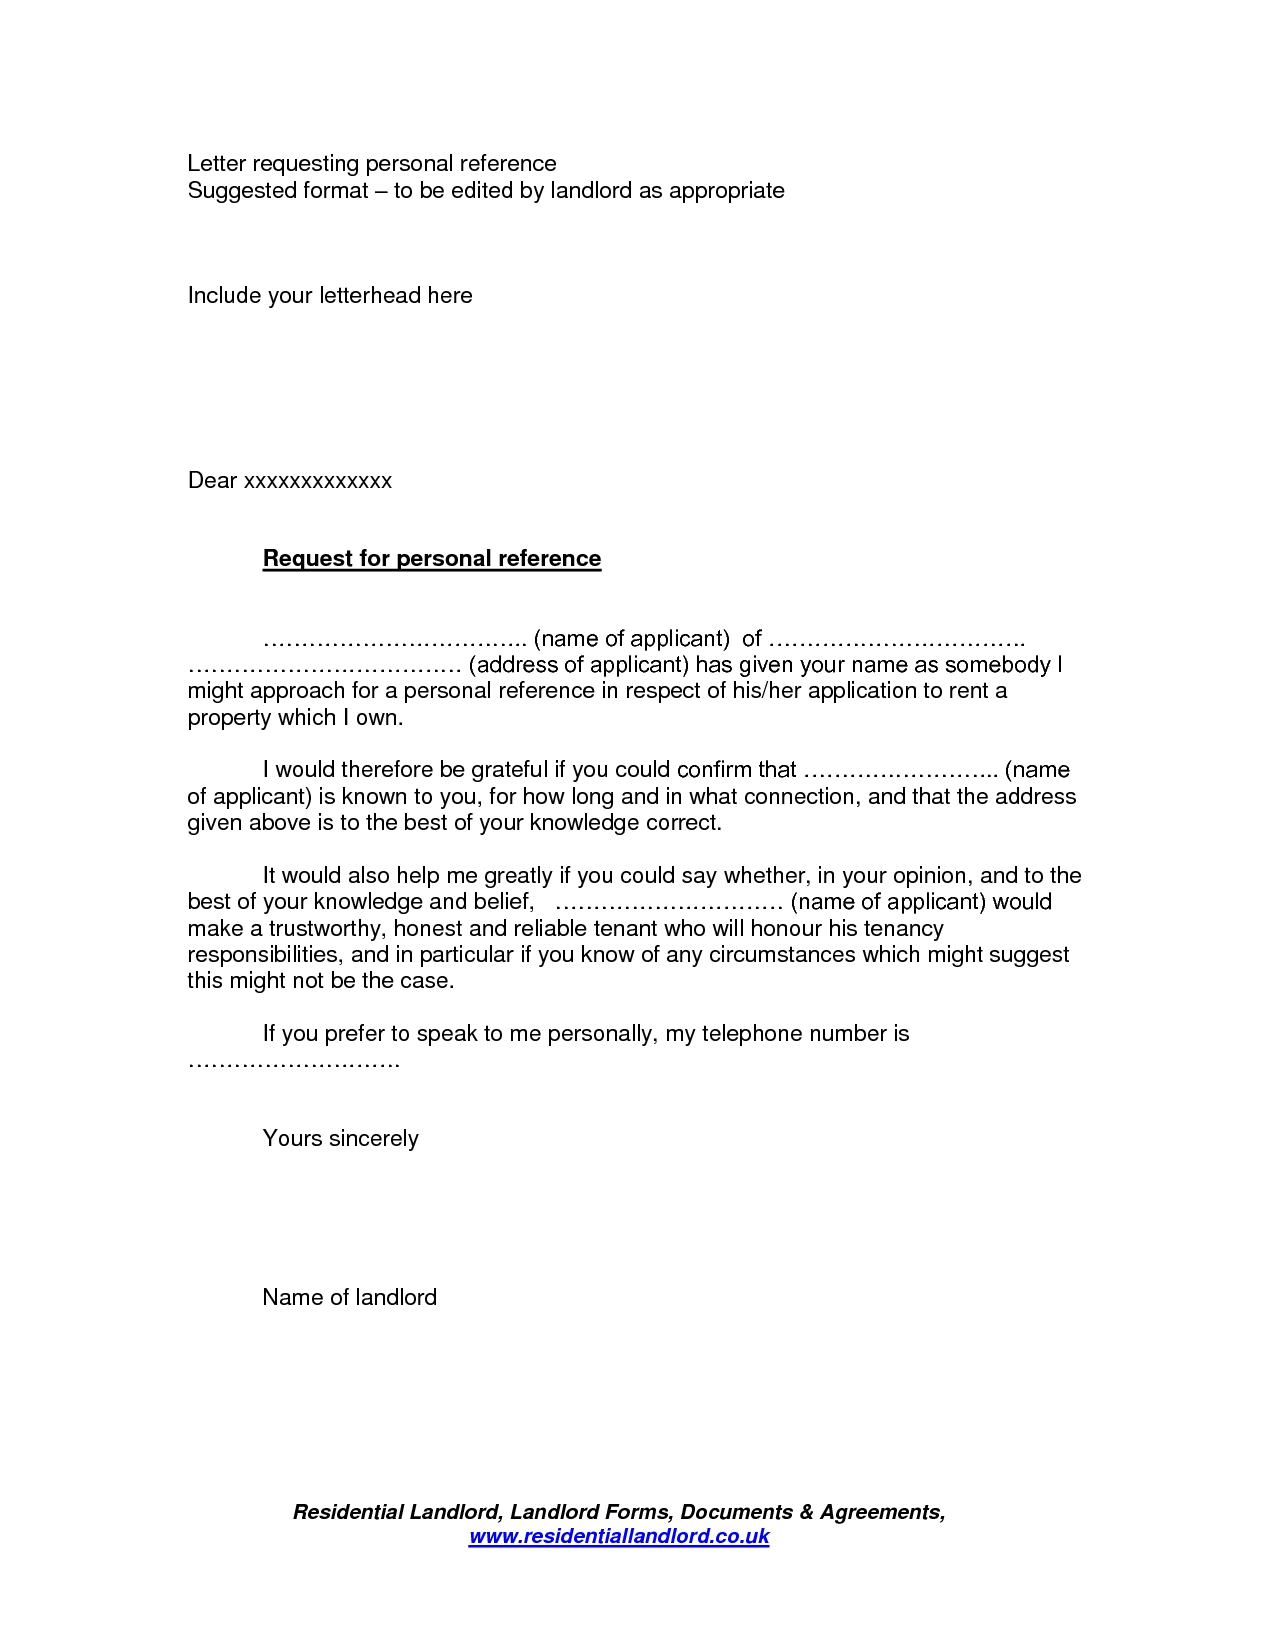 Rental Reference Letter Template - Rental Reference Letter From Friend Pdf format